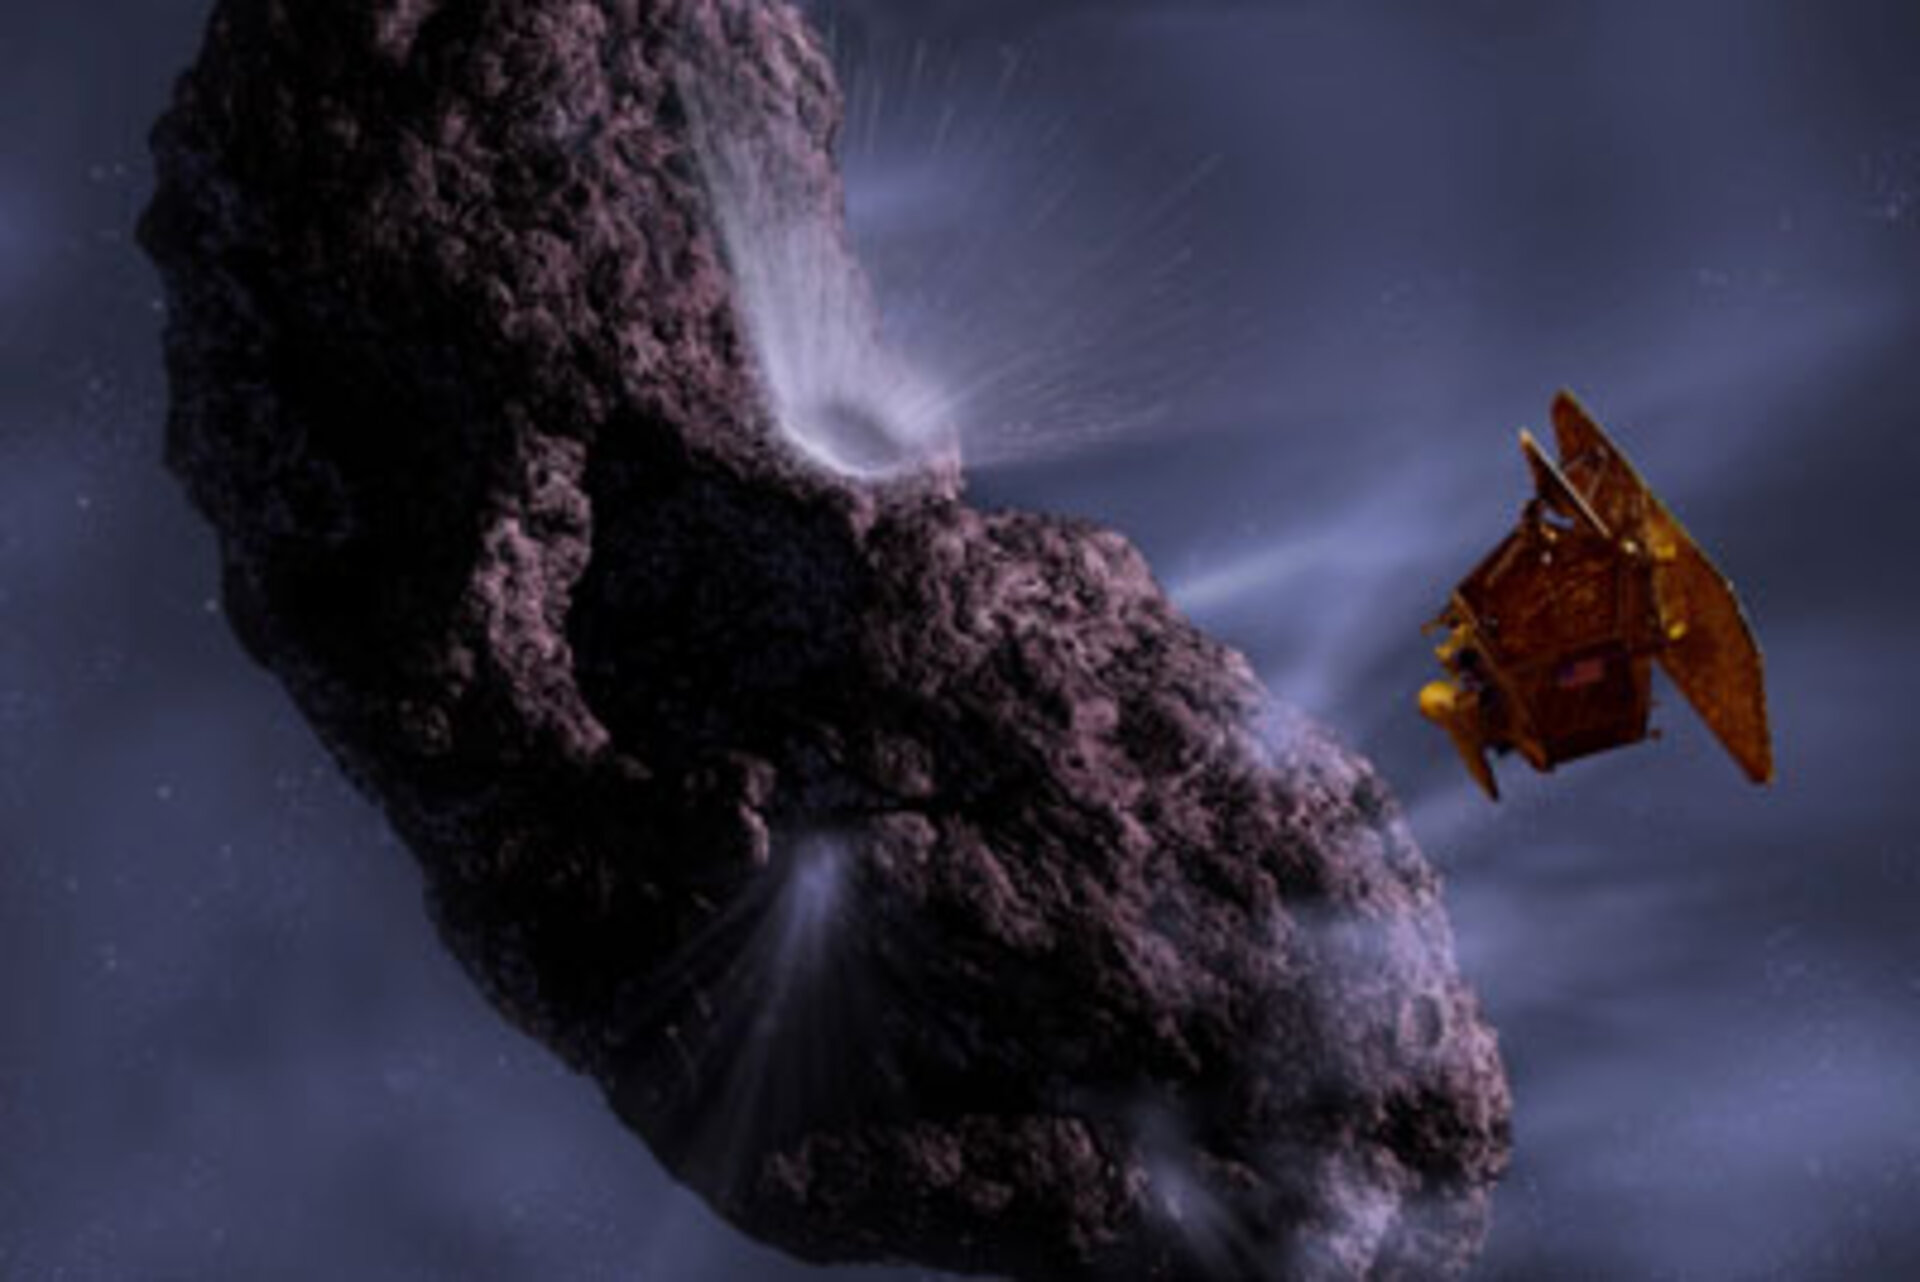 Artist's impression of the Deep Impact collision